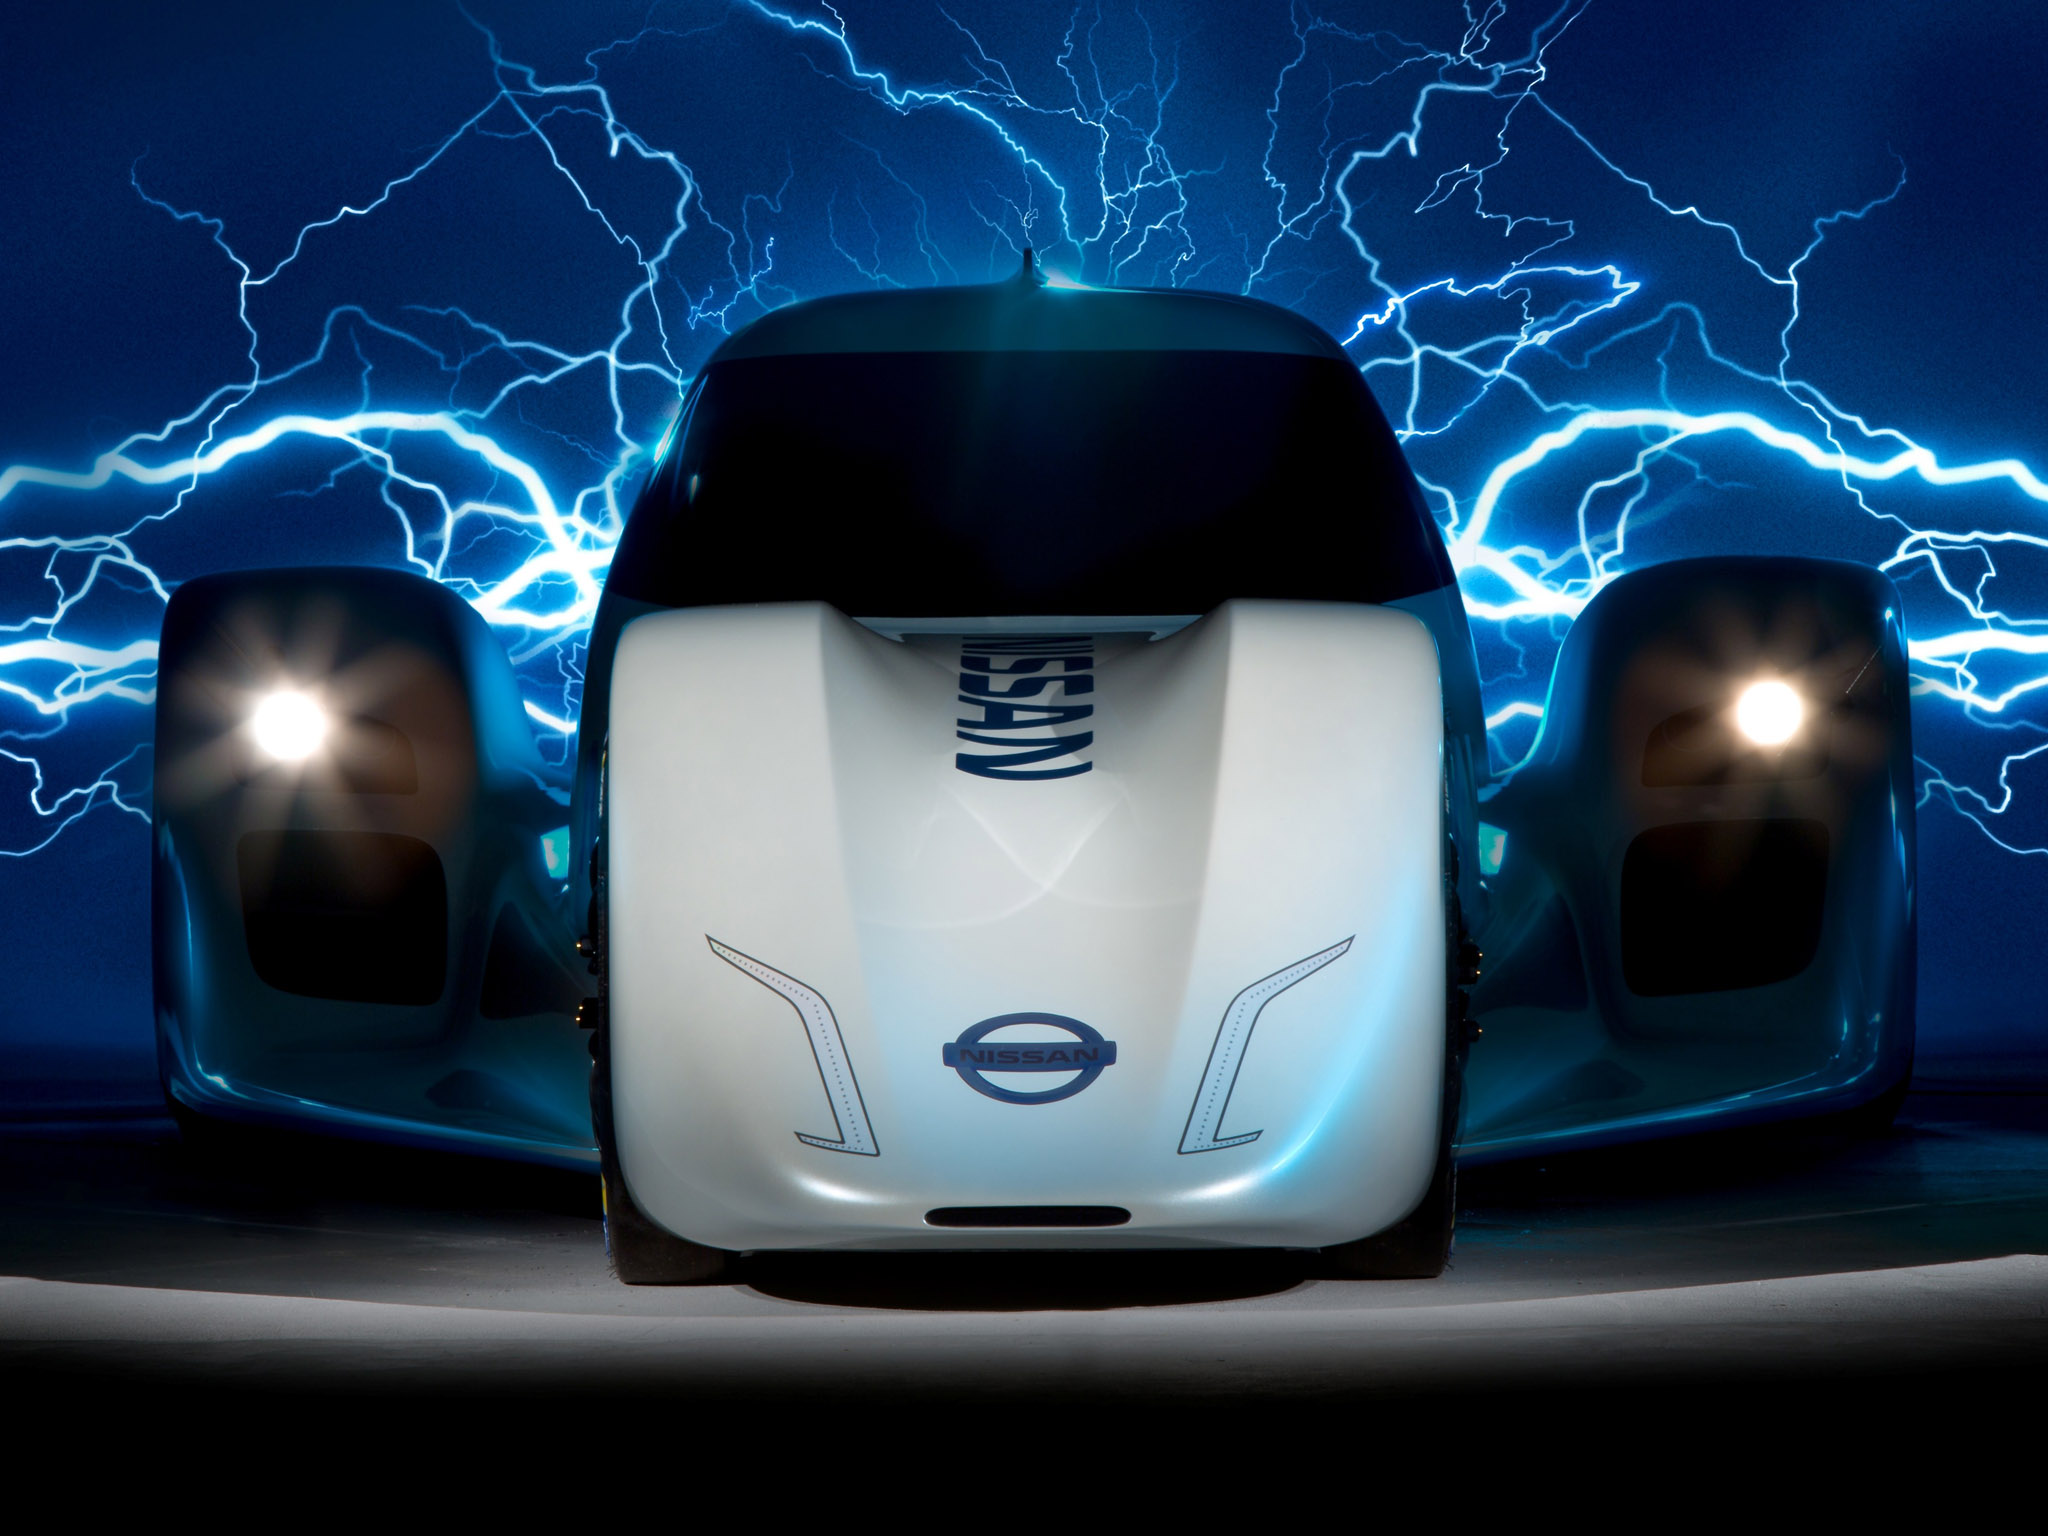 2014, Nissan, Zeod, Rc, Electric, Supercar, Supercars Wallpaper